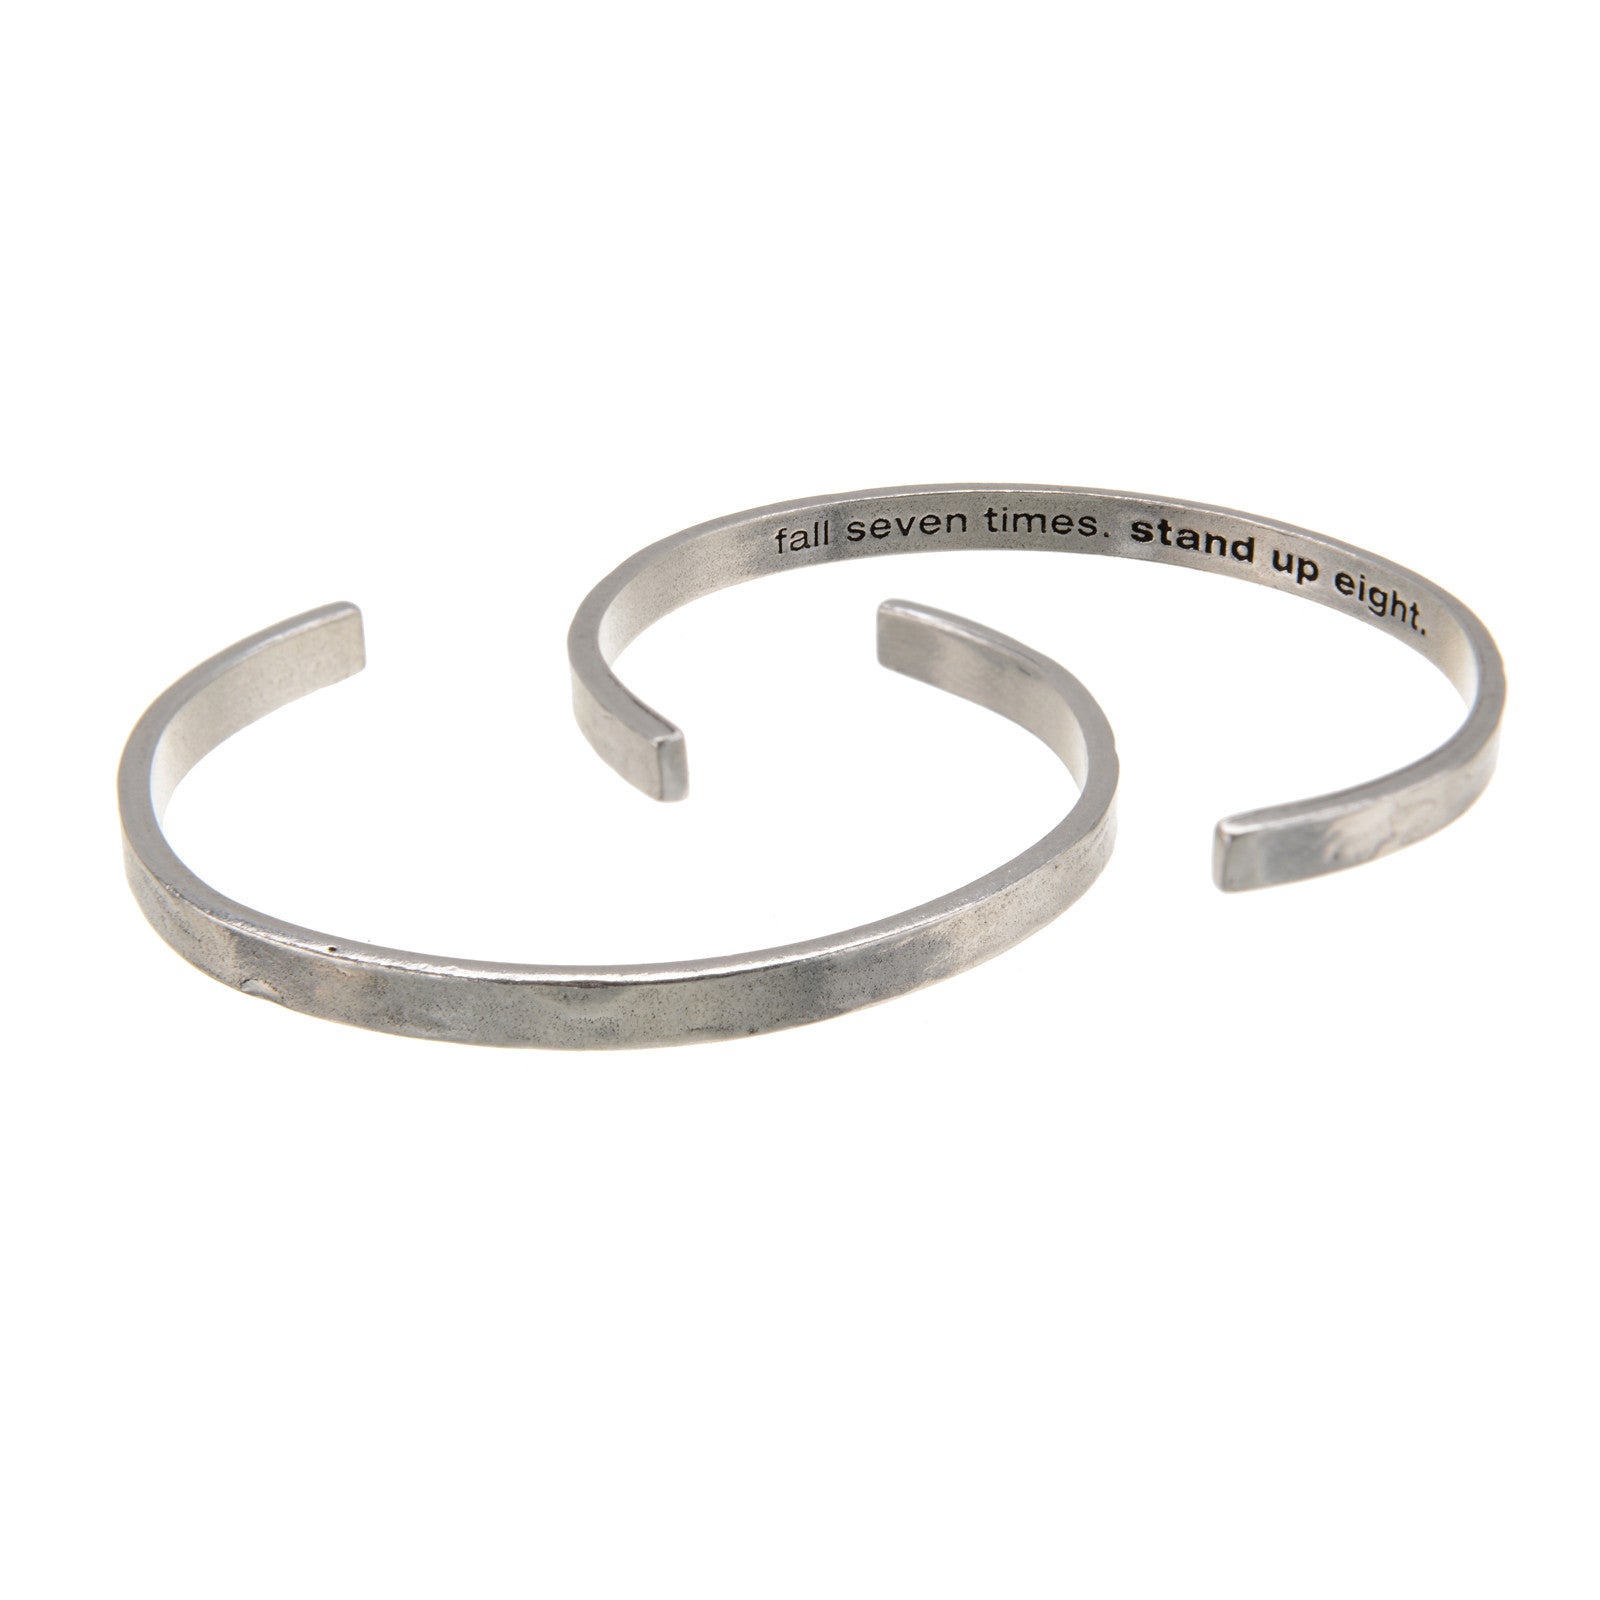 Fall Seven Times, Stand Up Eight DUDE Cuff Bracelet